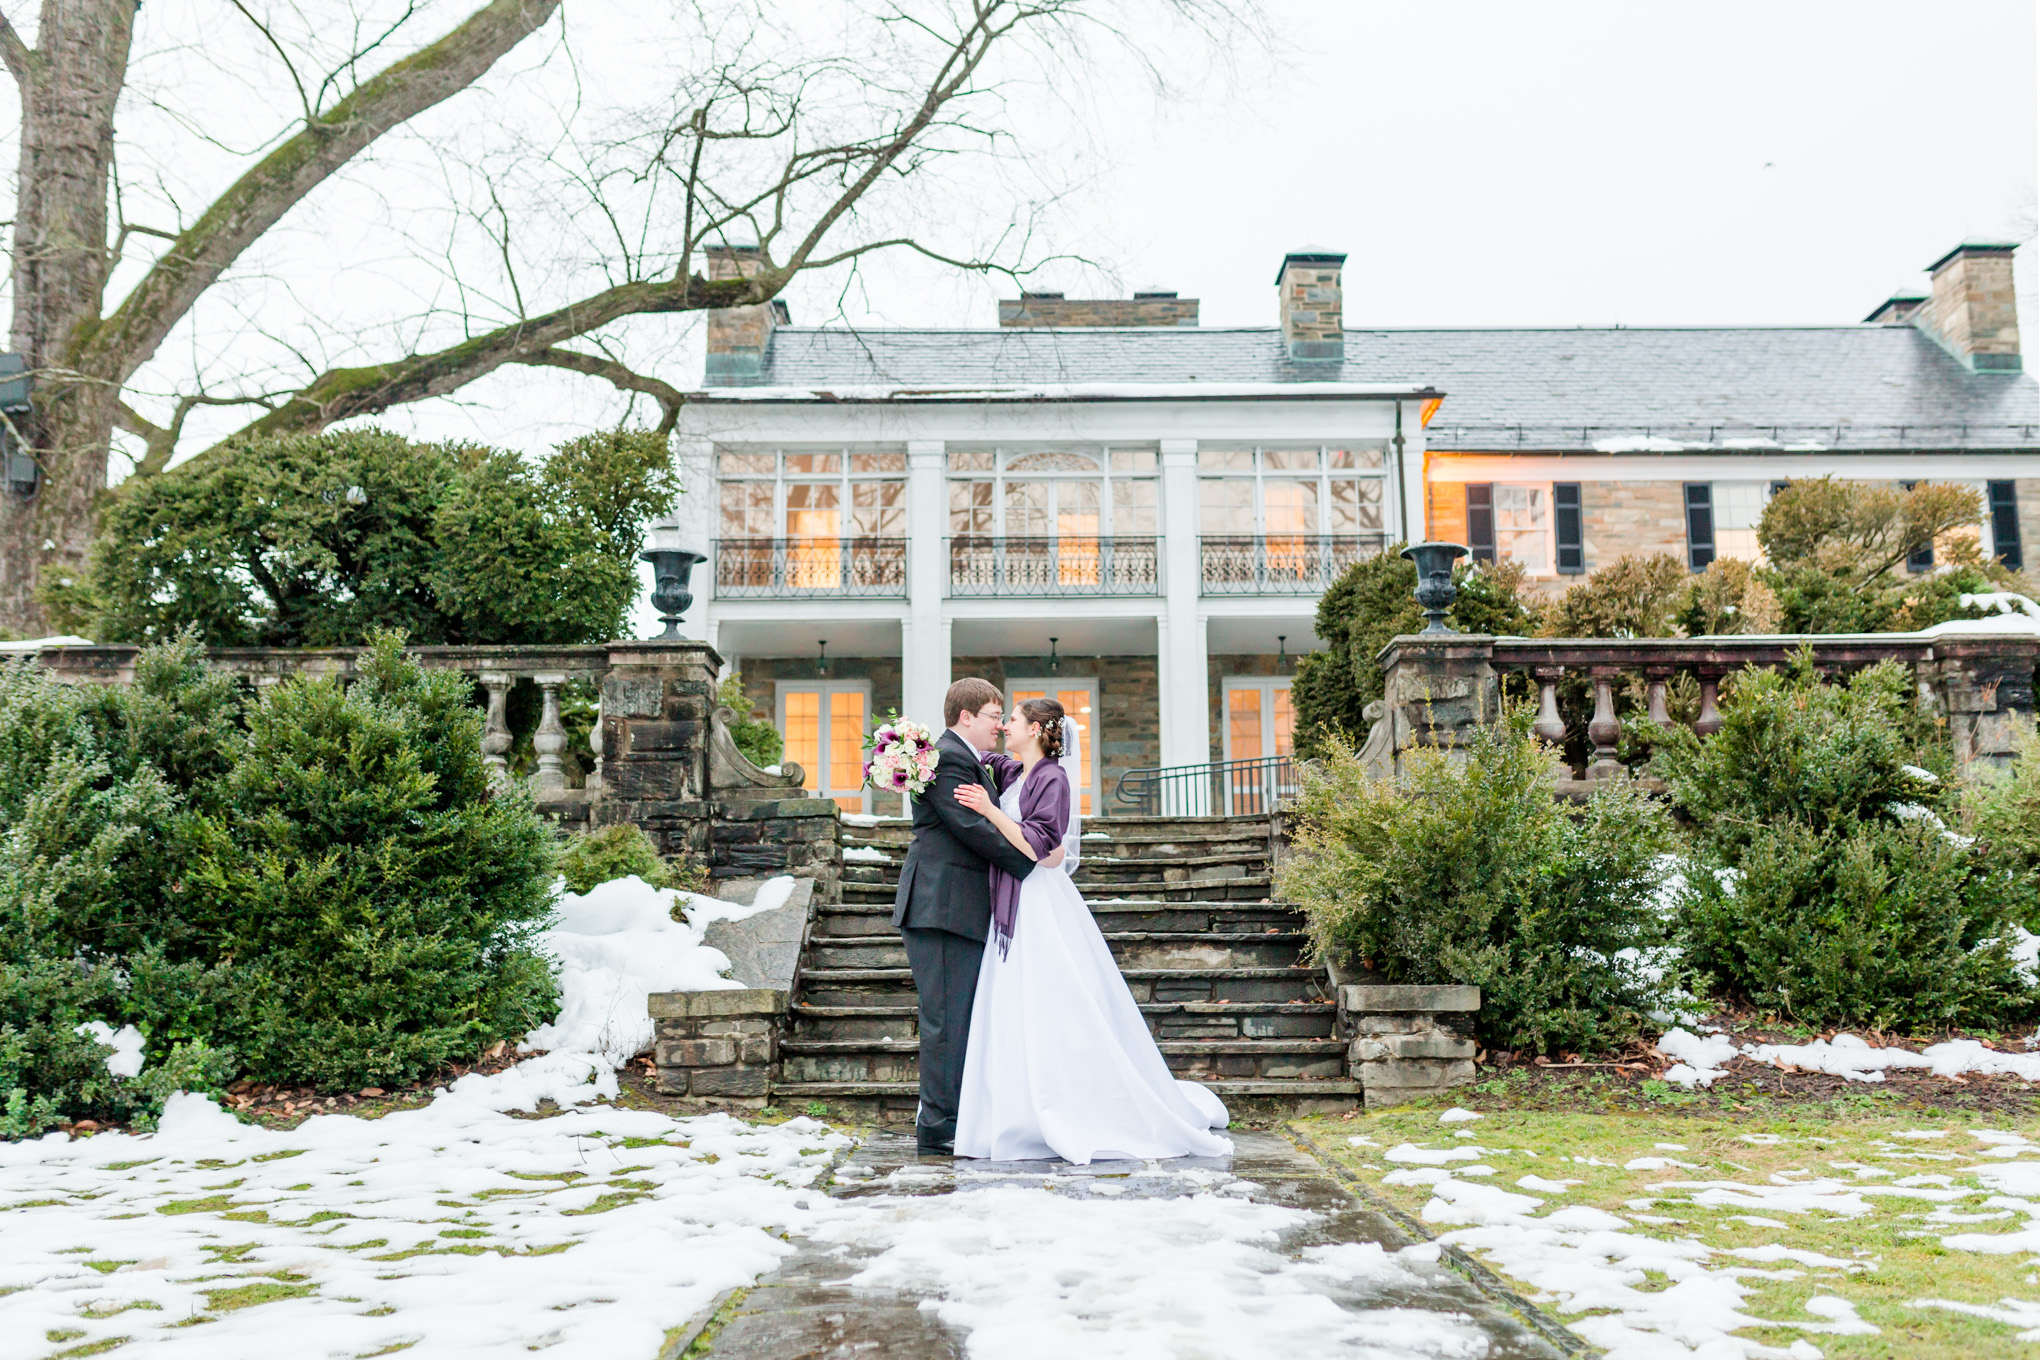 classic winter wedding in Maryland, winter wedding, classic winter wedding, classic wedding, elegant couple, purple aesthetic, church wedding, Maryland wedding, Rachel E.H. Photography, Maryland wedding photographer, natural light portraits, couple goals, relationship goals, classic wedding dress, winter white wedding, DC wedding photographer, epic portrait, Glenview Mansion